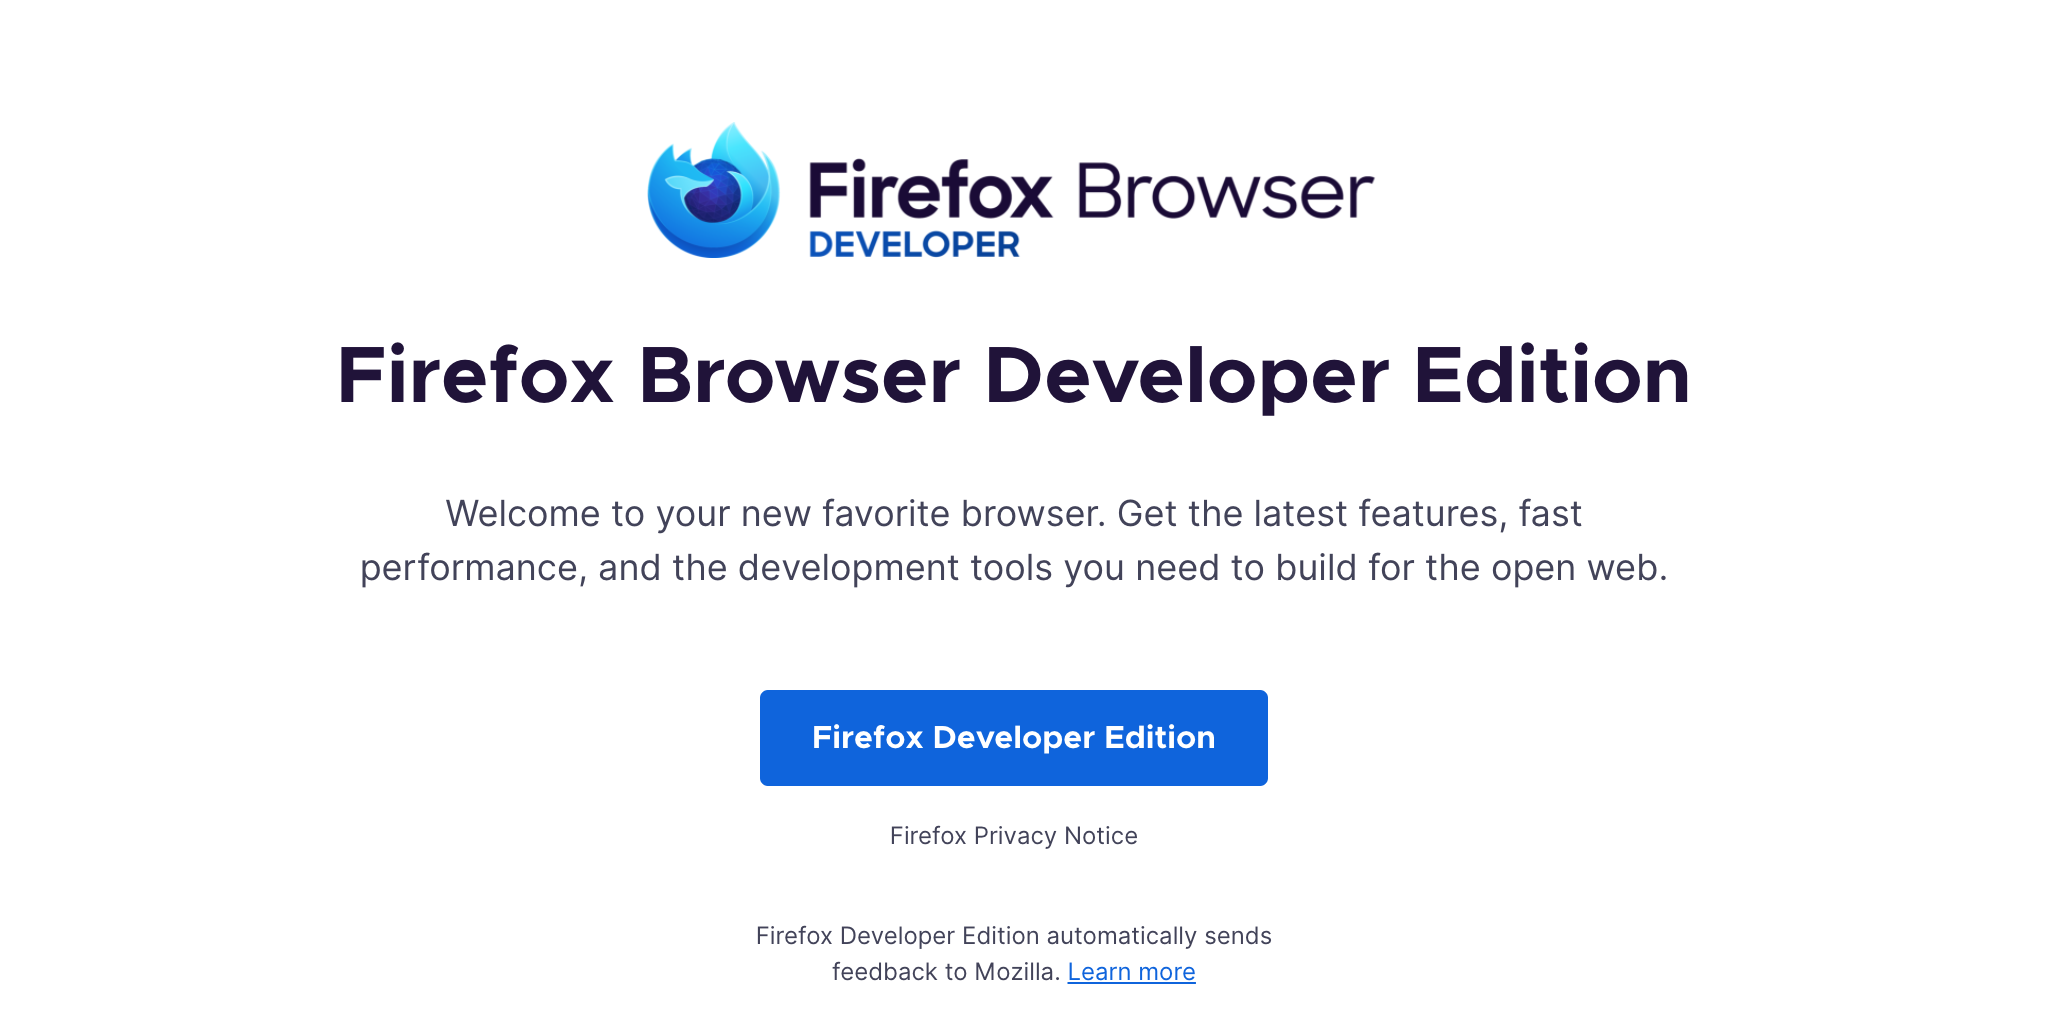 Identify fonts in Chrome, Edge and Firefox using Developer Tools